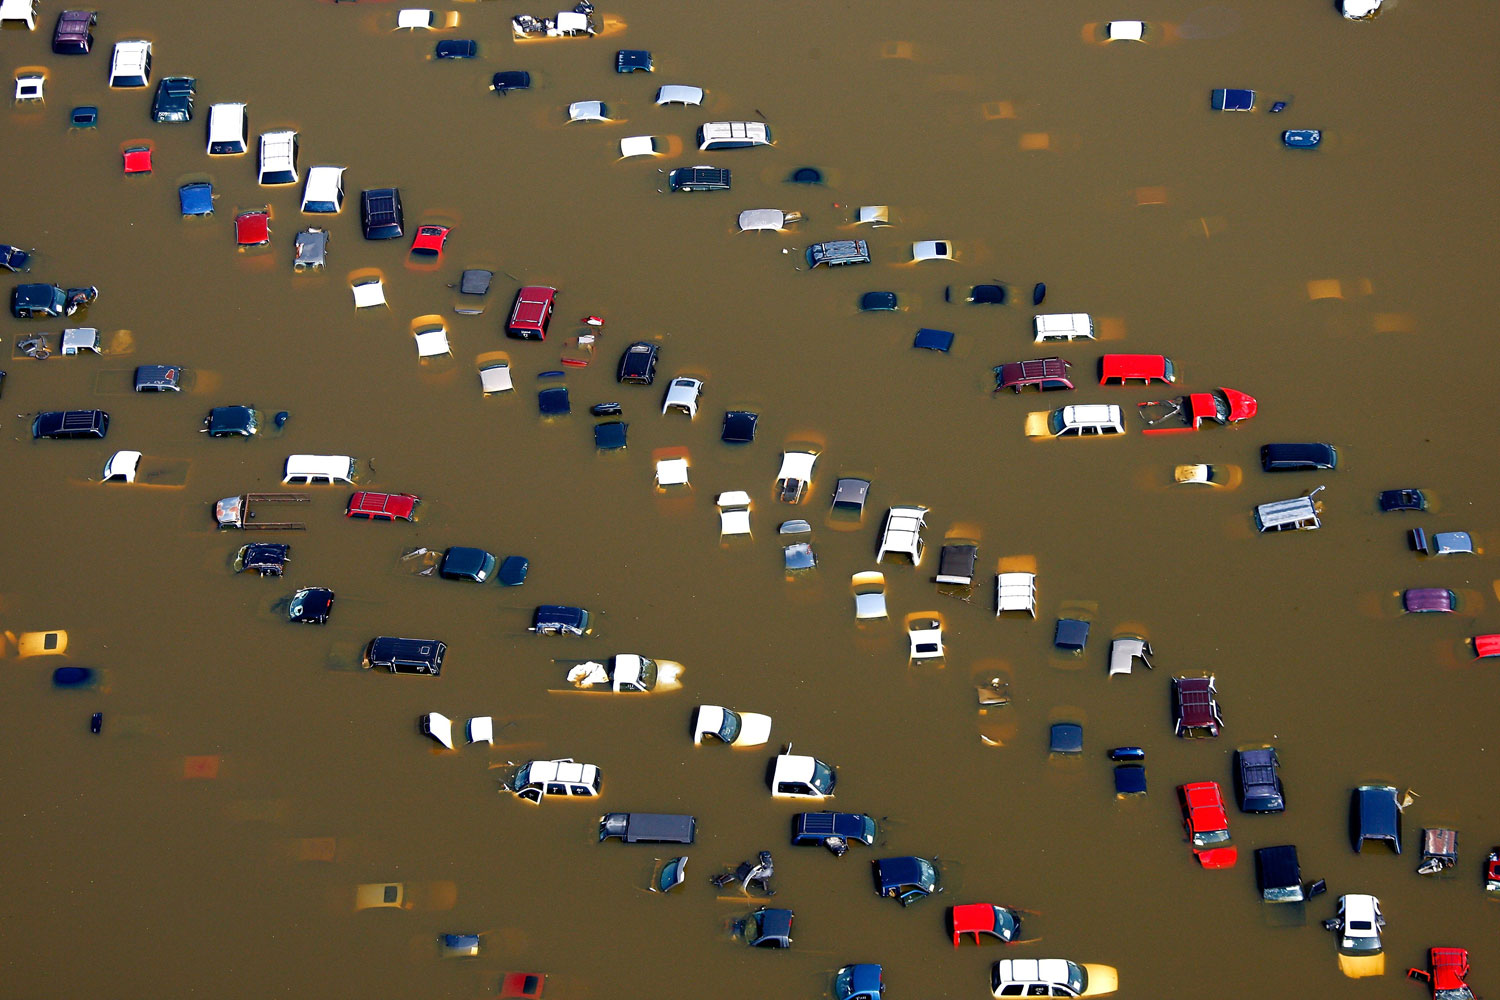 May 10, 2011 - Cars lie submerged in overflow water from the Wolf River on McMiller Road near Jackson. After weeks of rising to historic levels the Mississippi River reached a crest just shy of the forecasted 48 feet at the Memphis gauge.